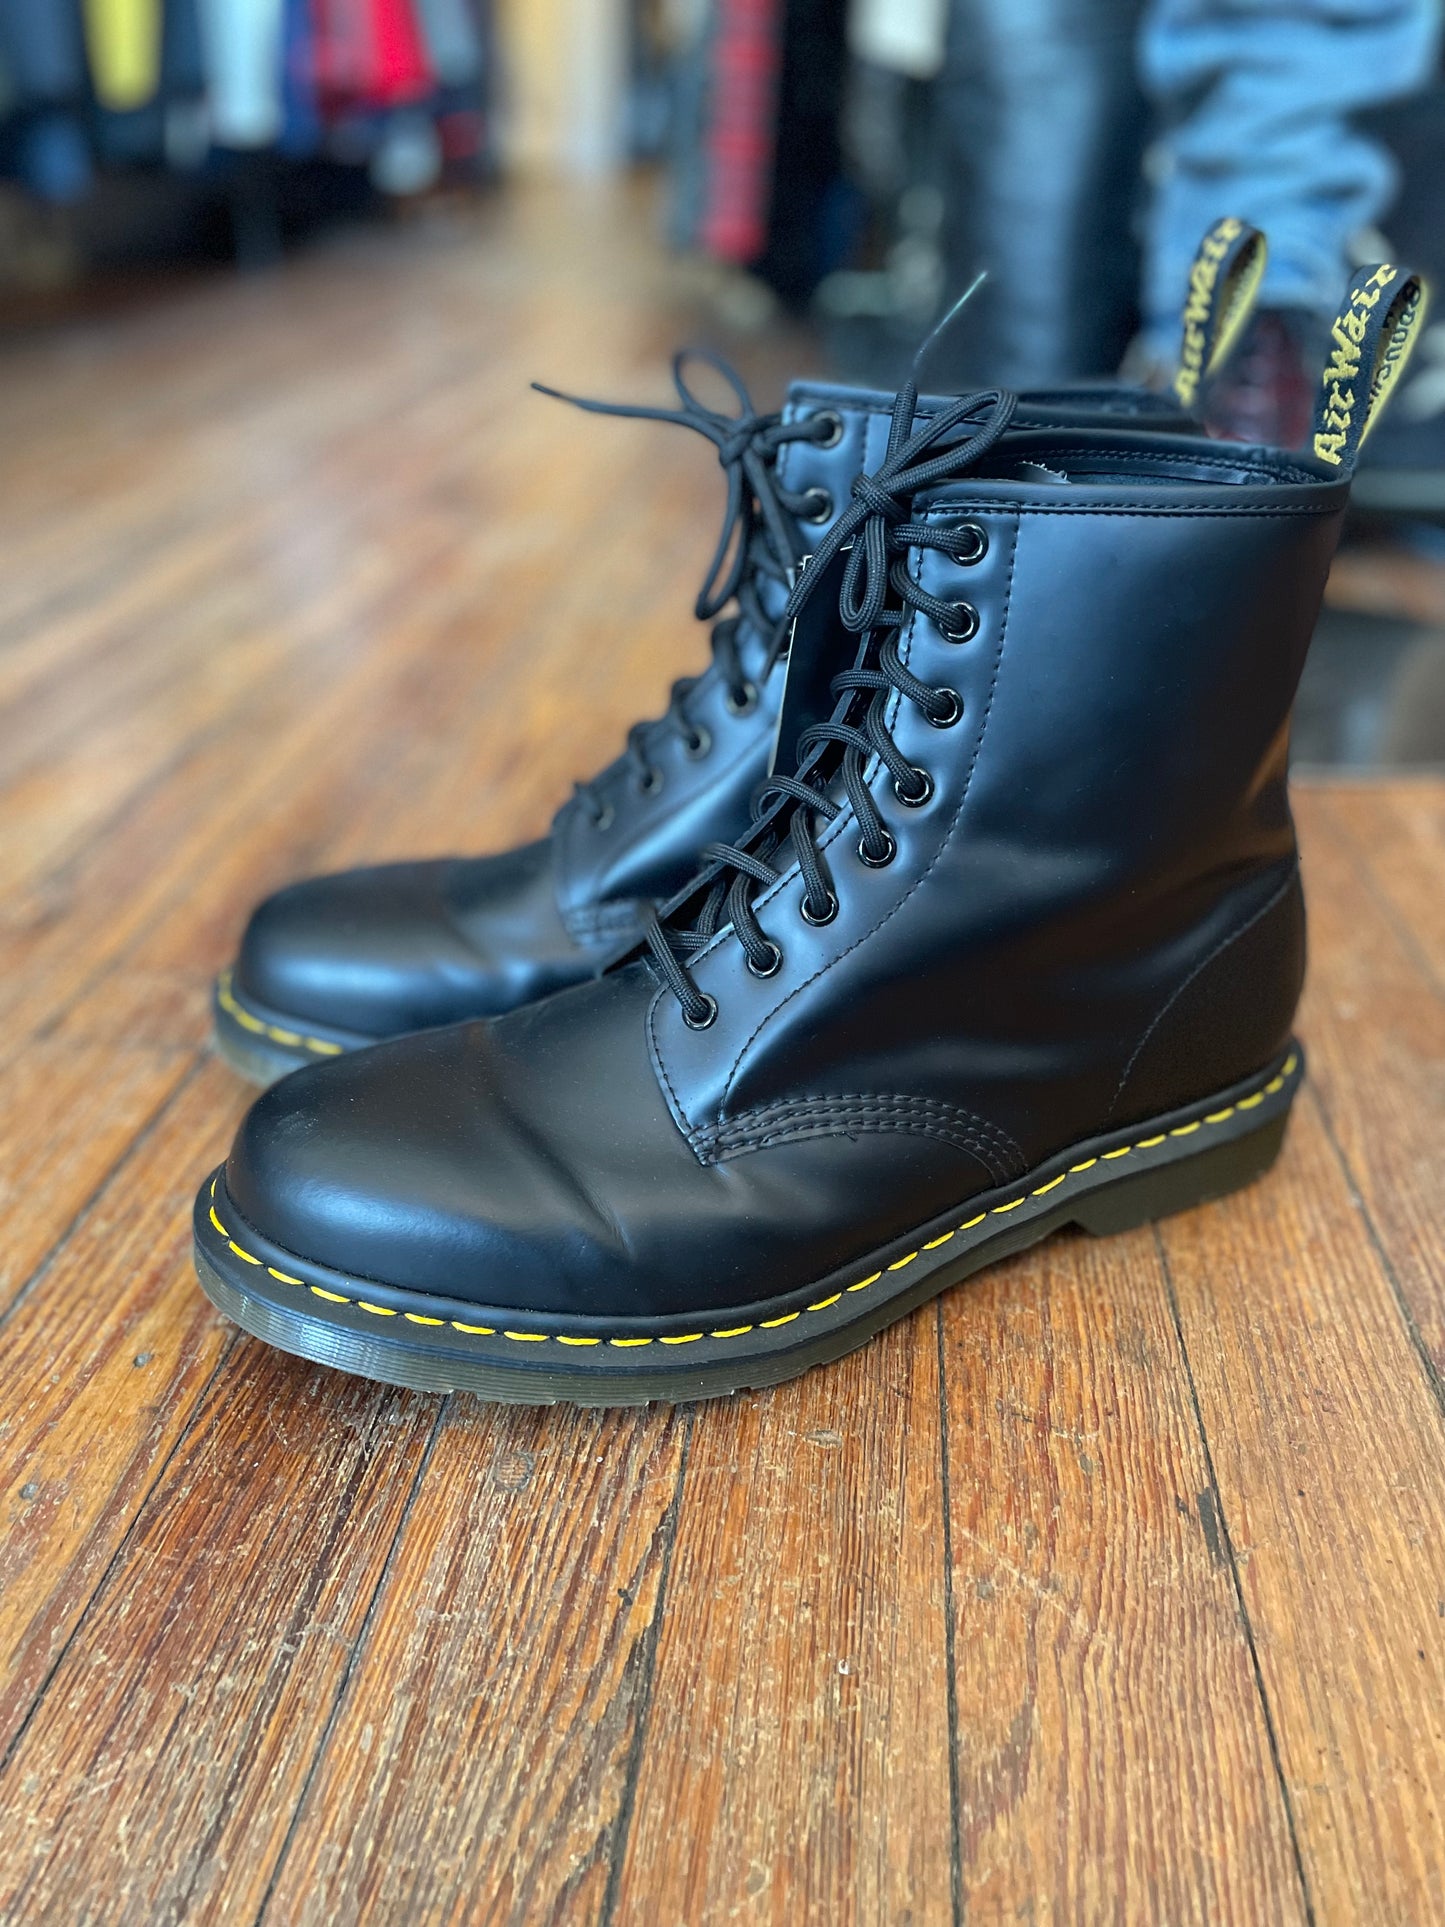 Classic Dr. Martens Black 8 Eyelet Smooth Combat Boots